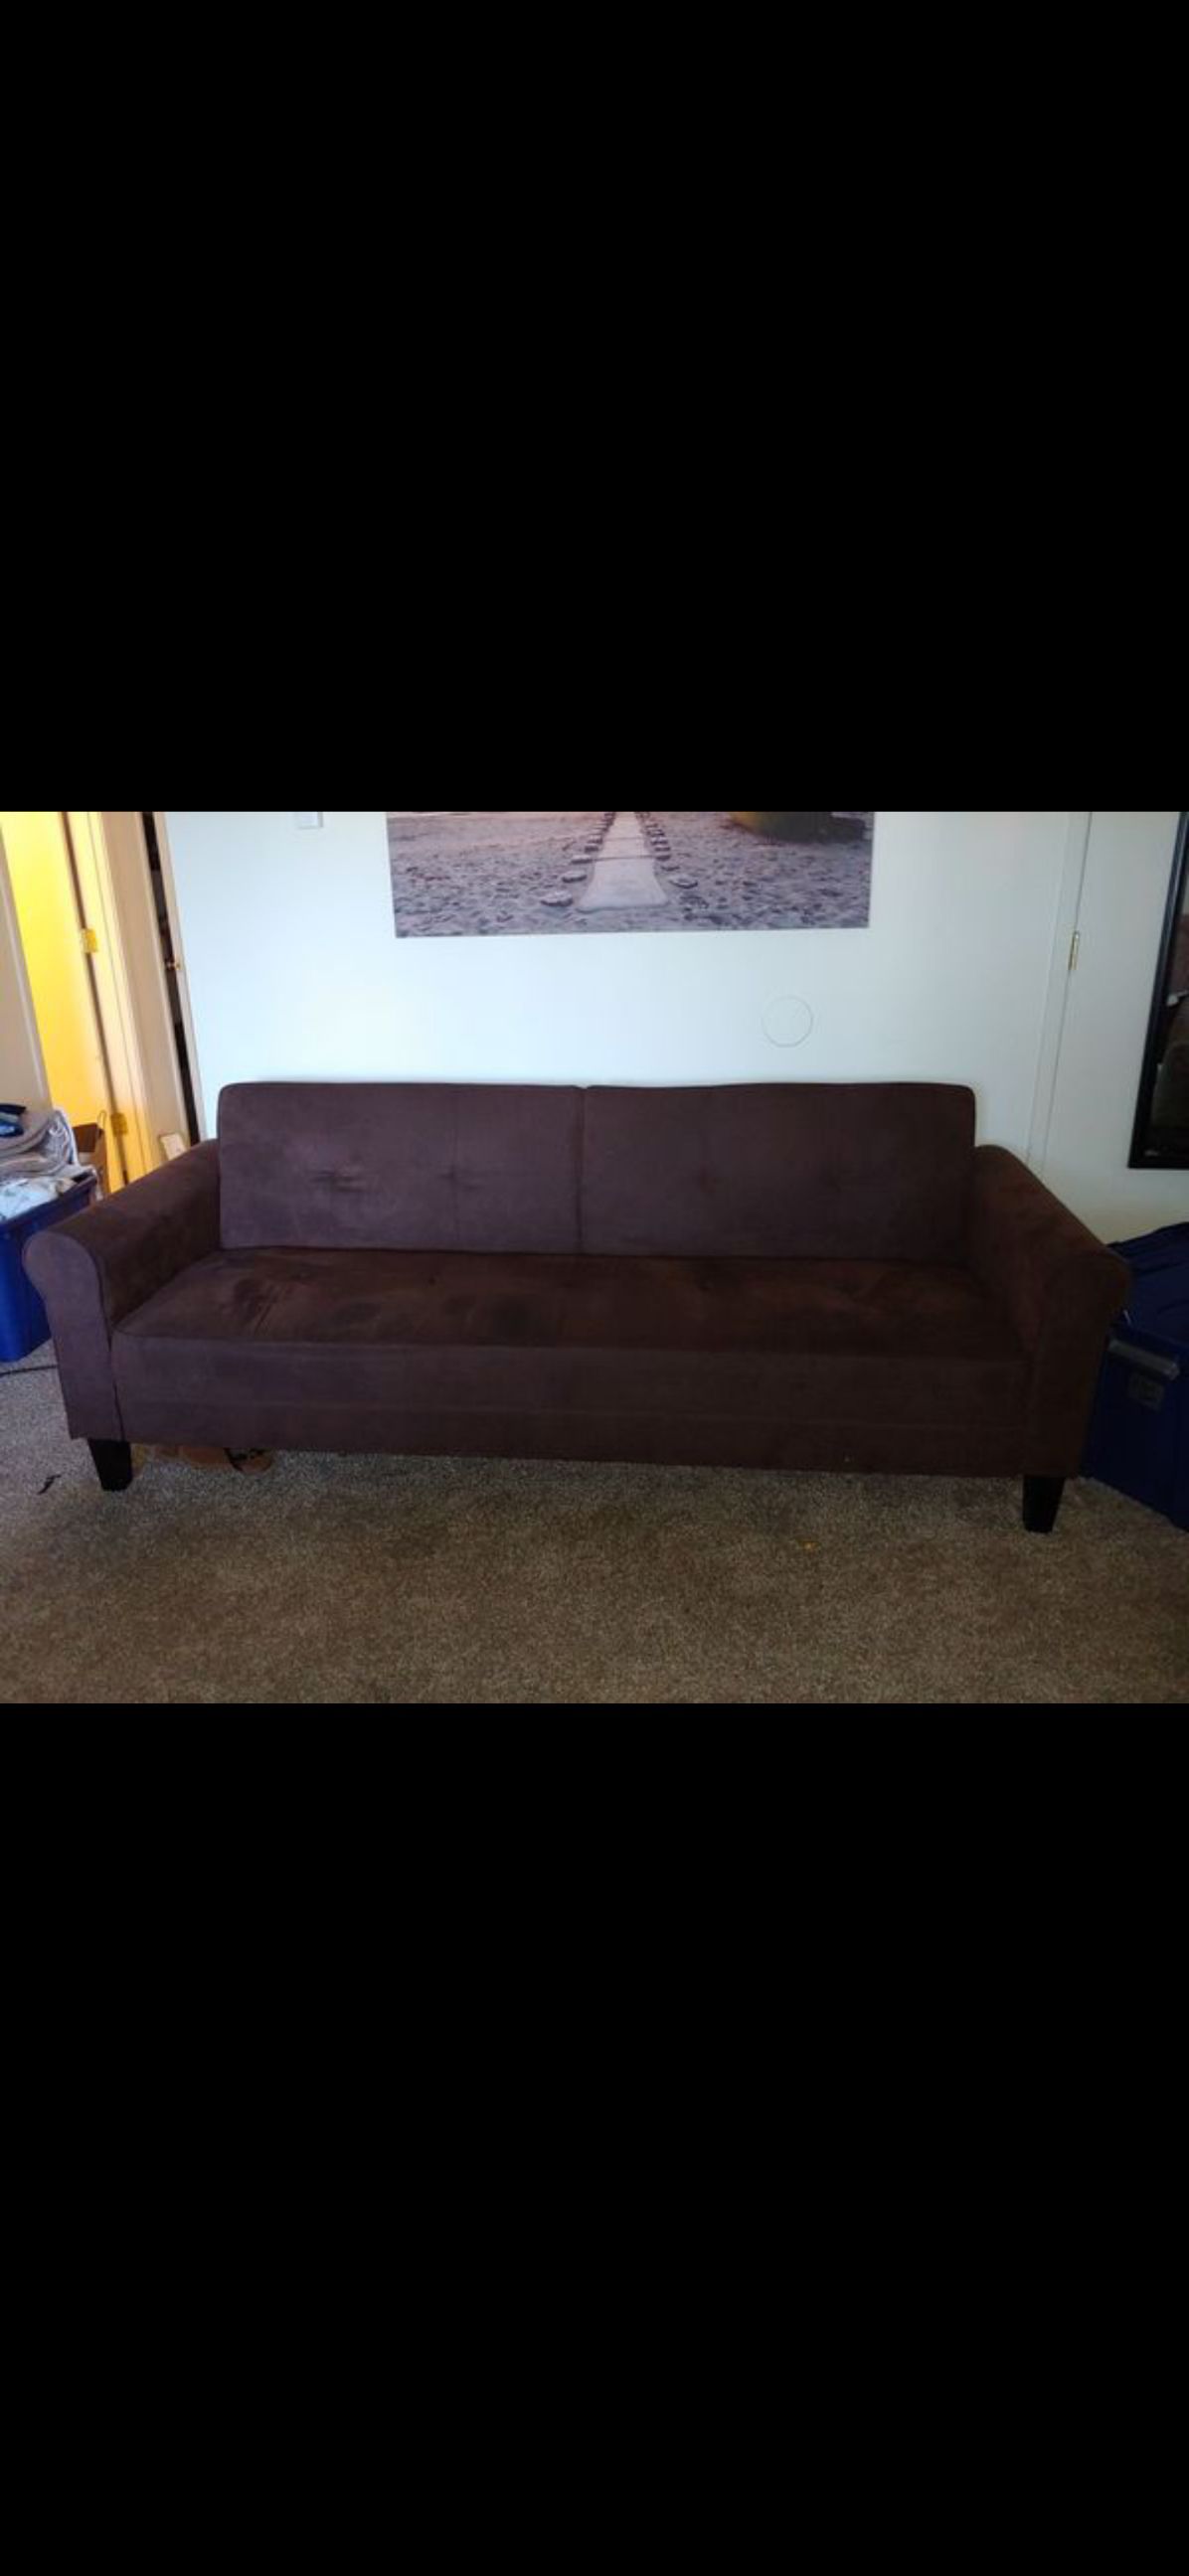 Excellent couch